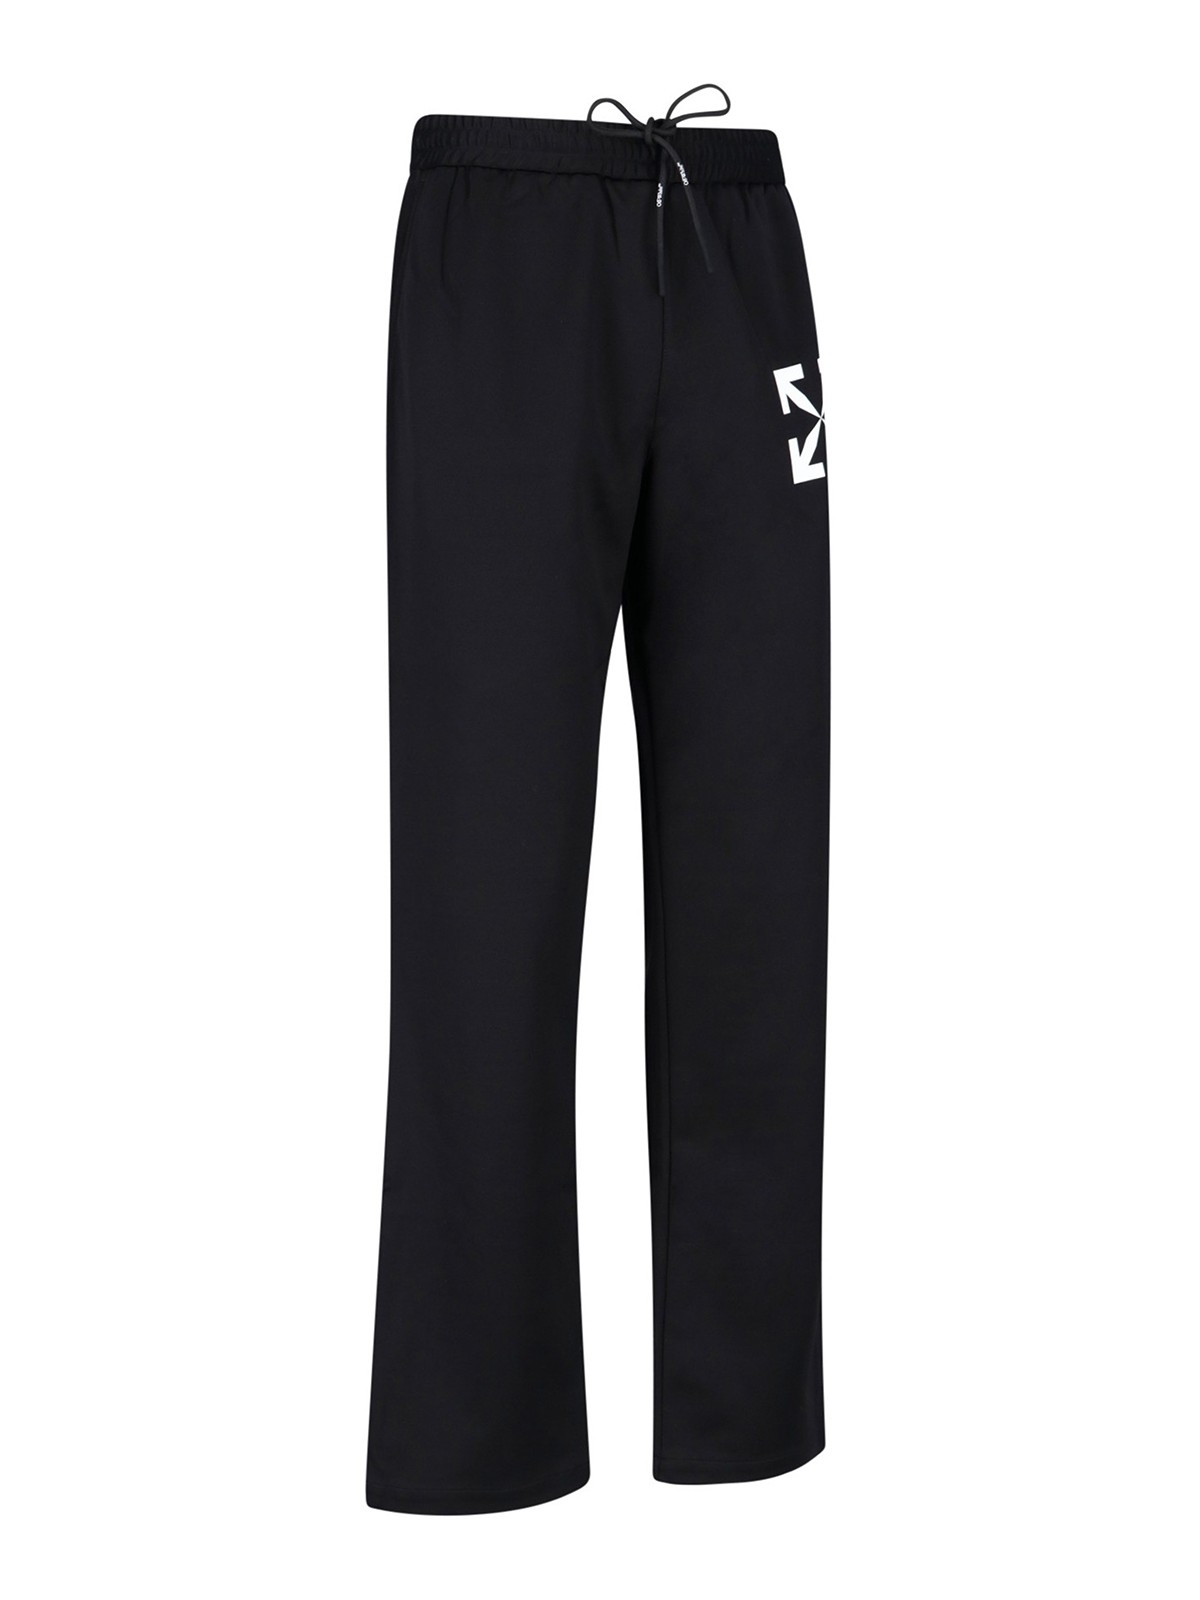 Track Pants | Sports Pants and Leggings Online